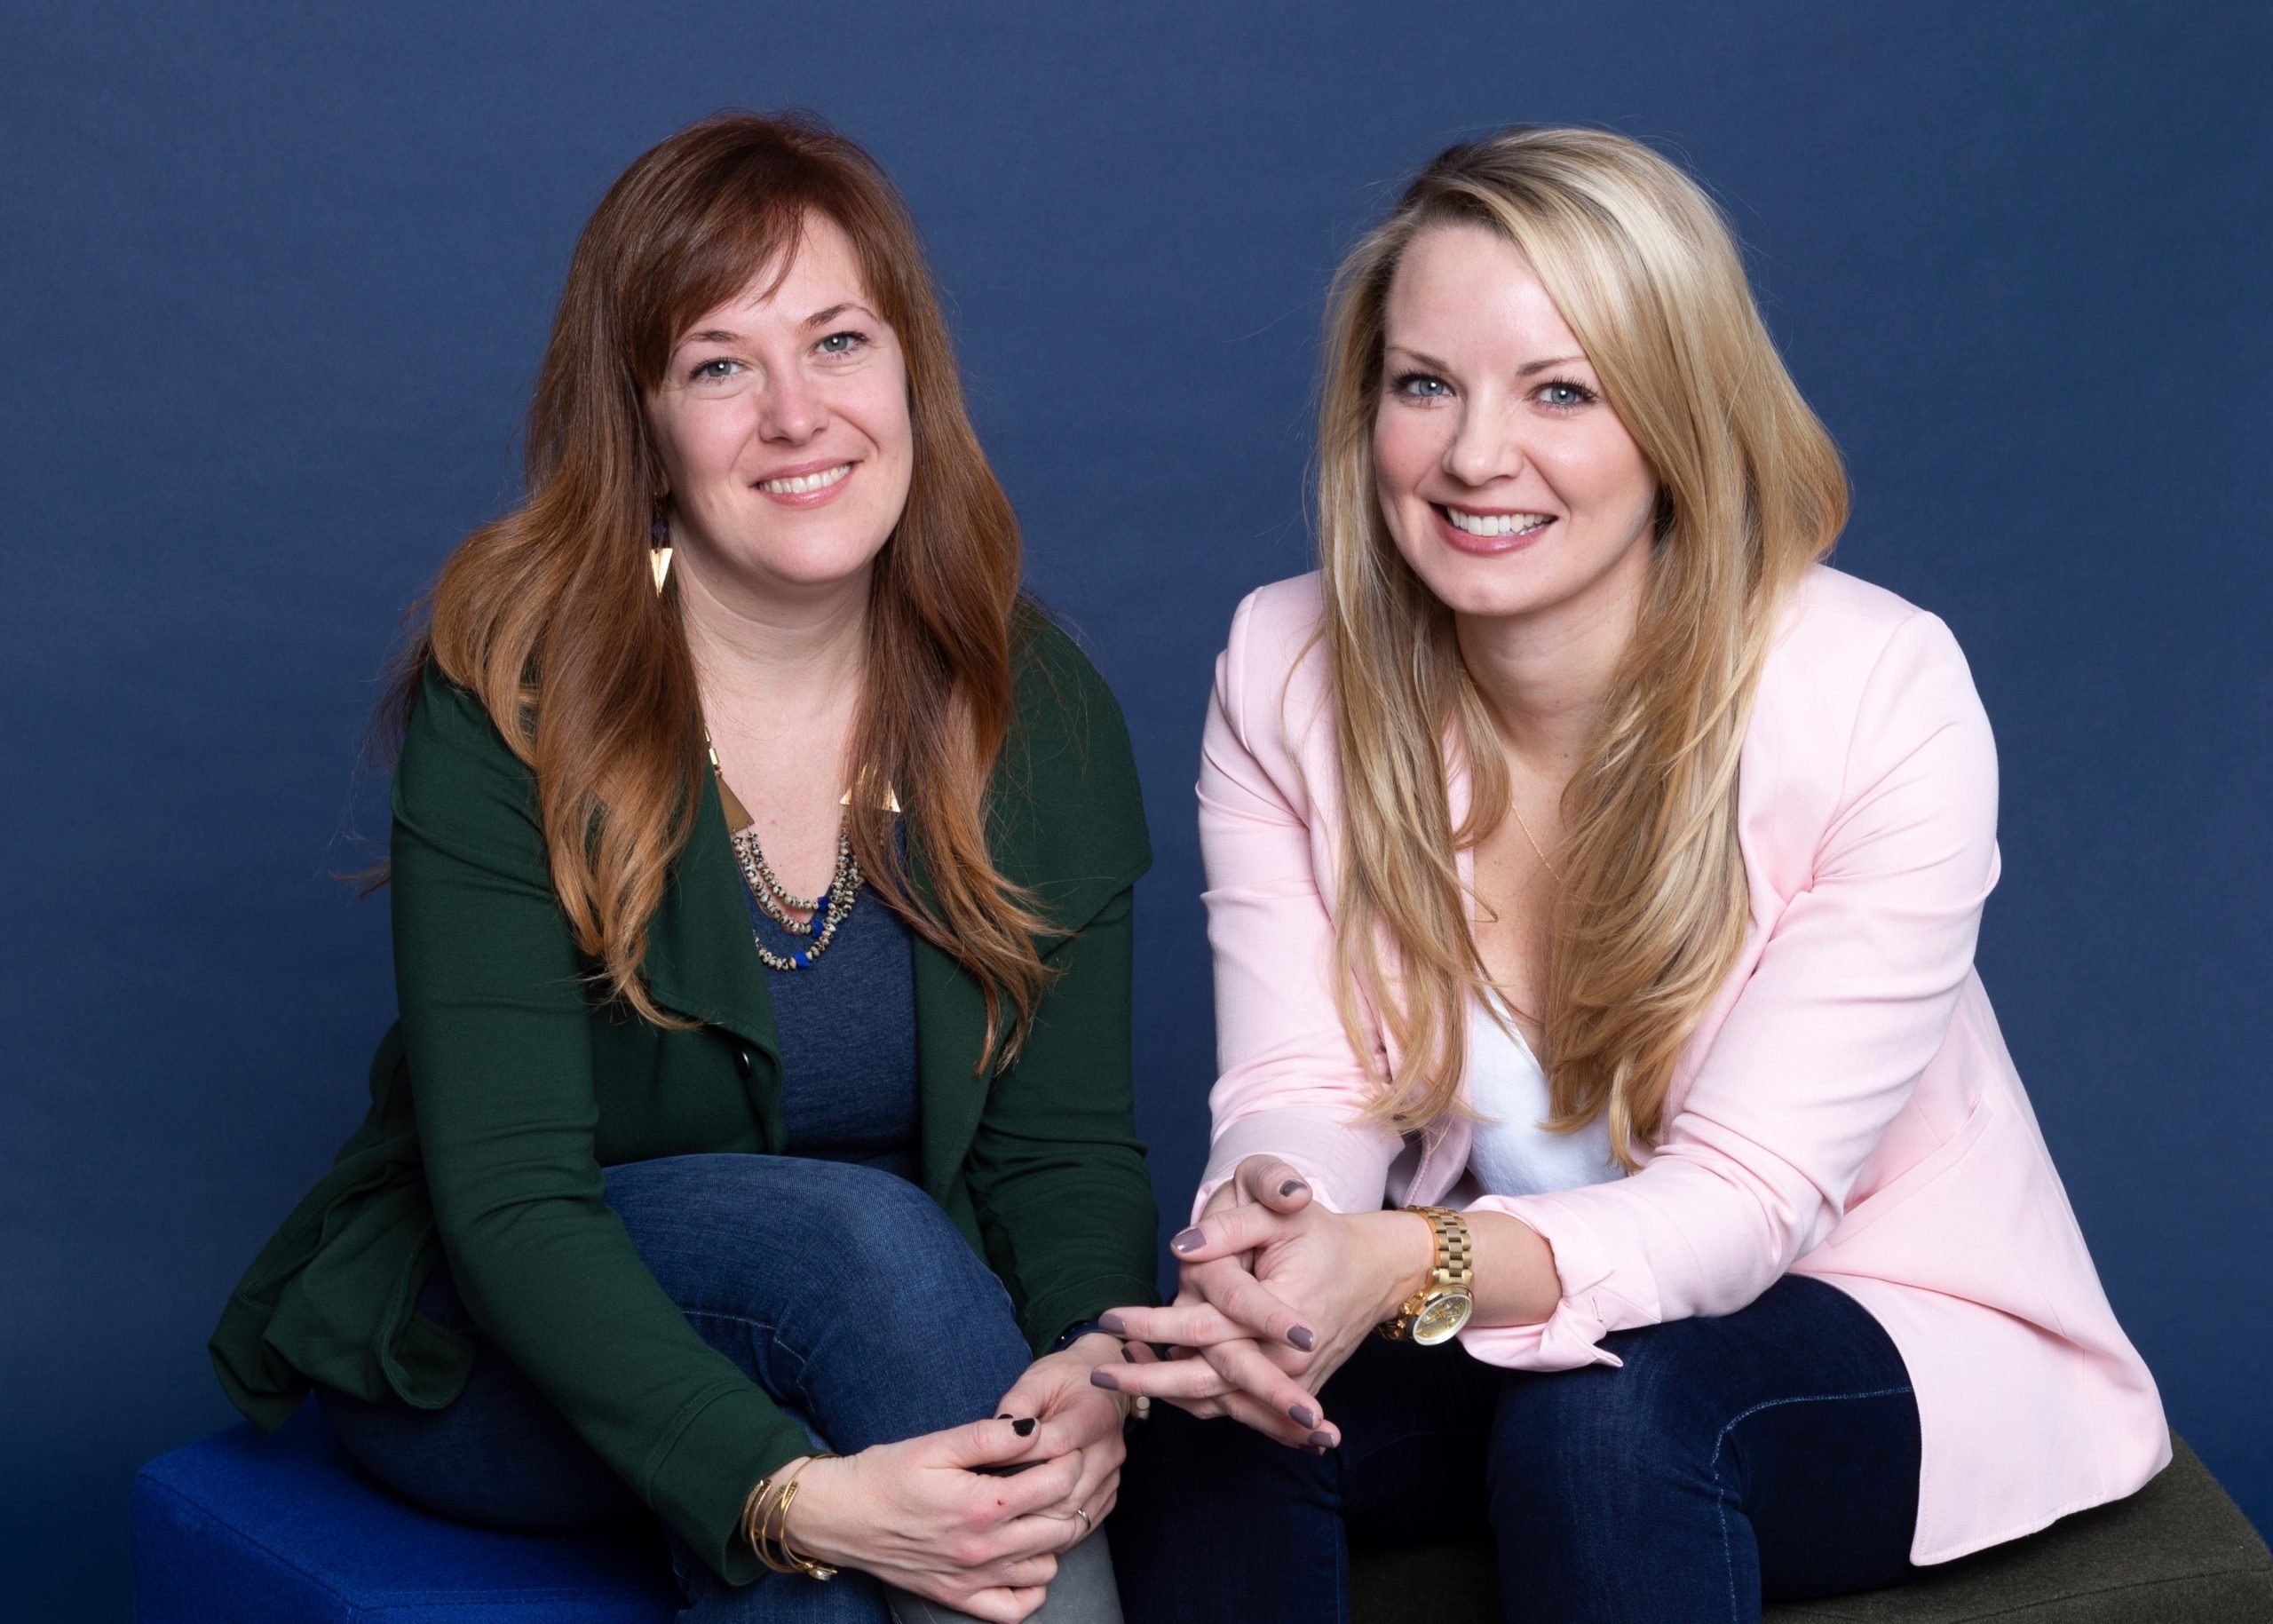 Mina Families, which offers alternative birthing experiences, is led by CEO Kristen Womack (L) and COO Terryn Lawrence (R).